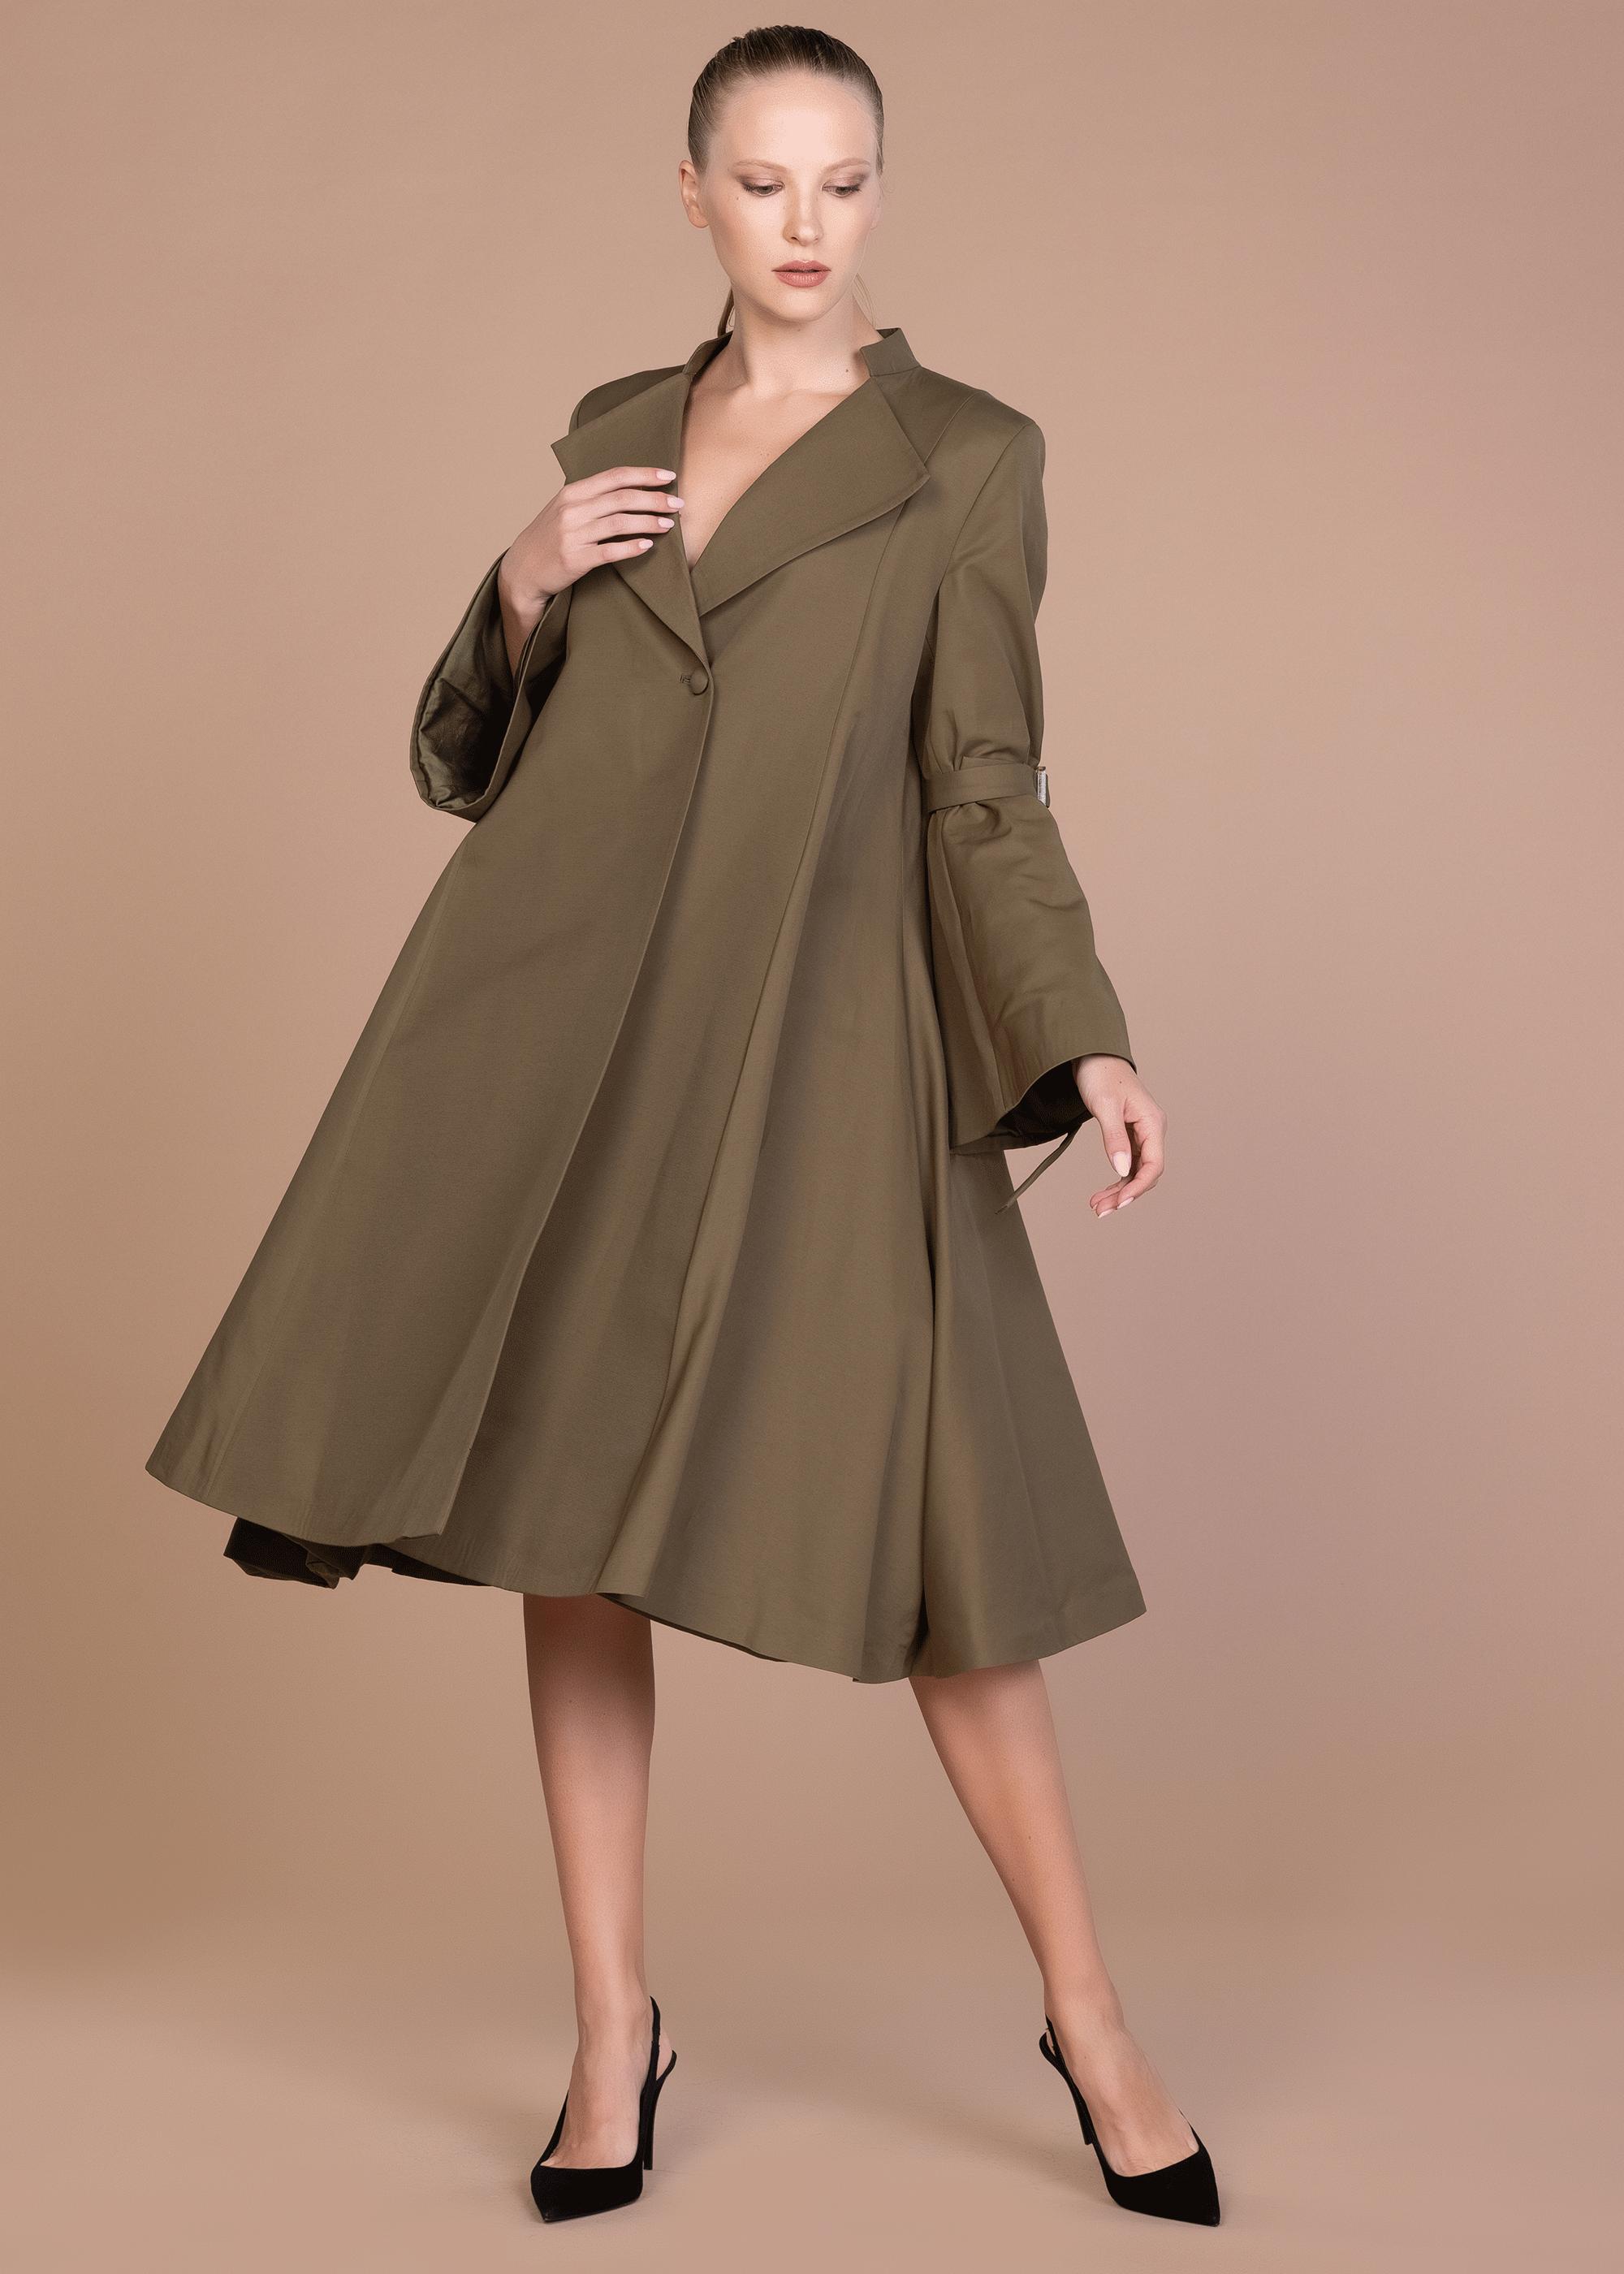 Coats and Jackets for women at Liliblanc online, Olive Green